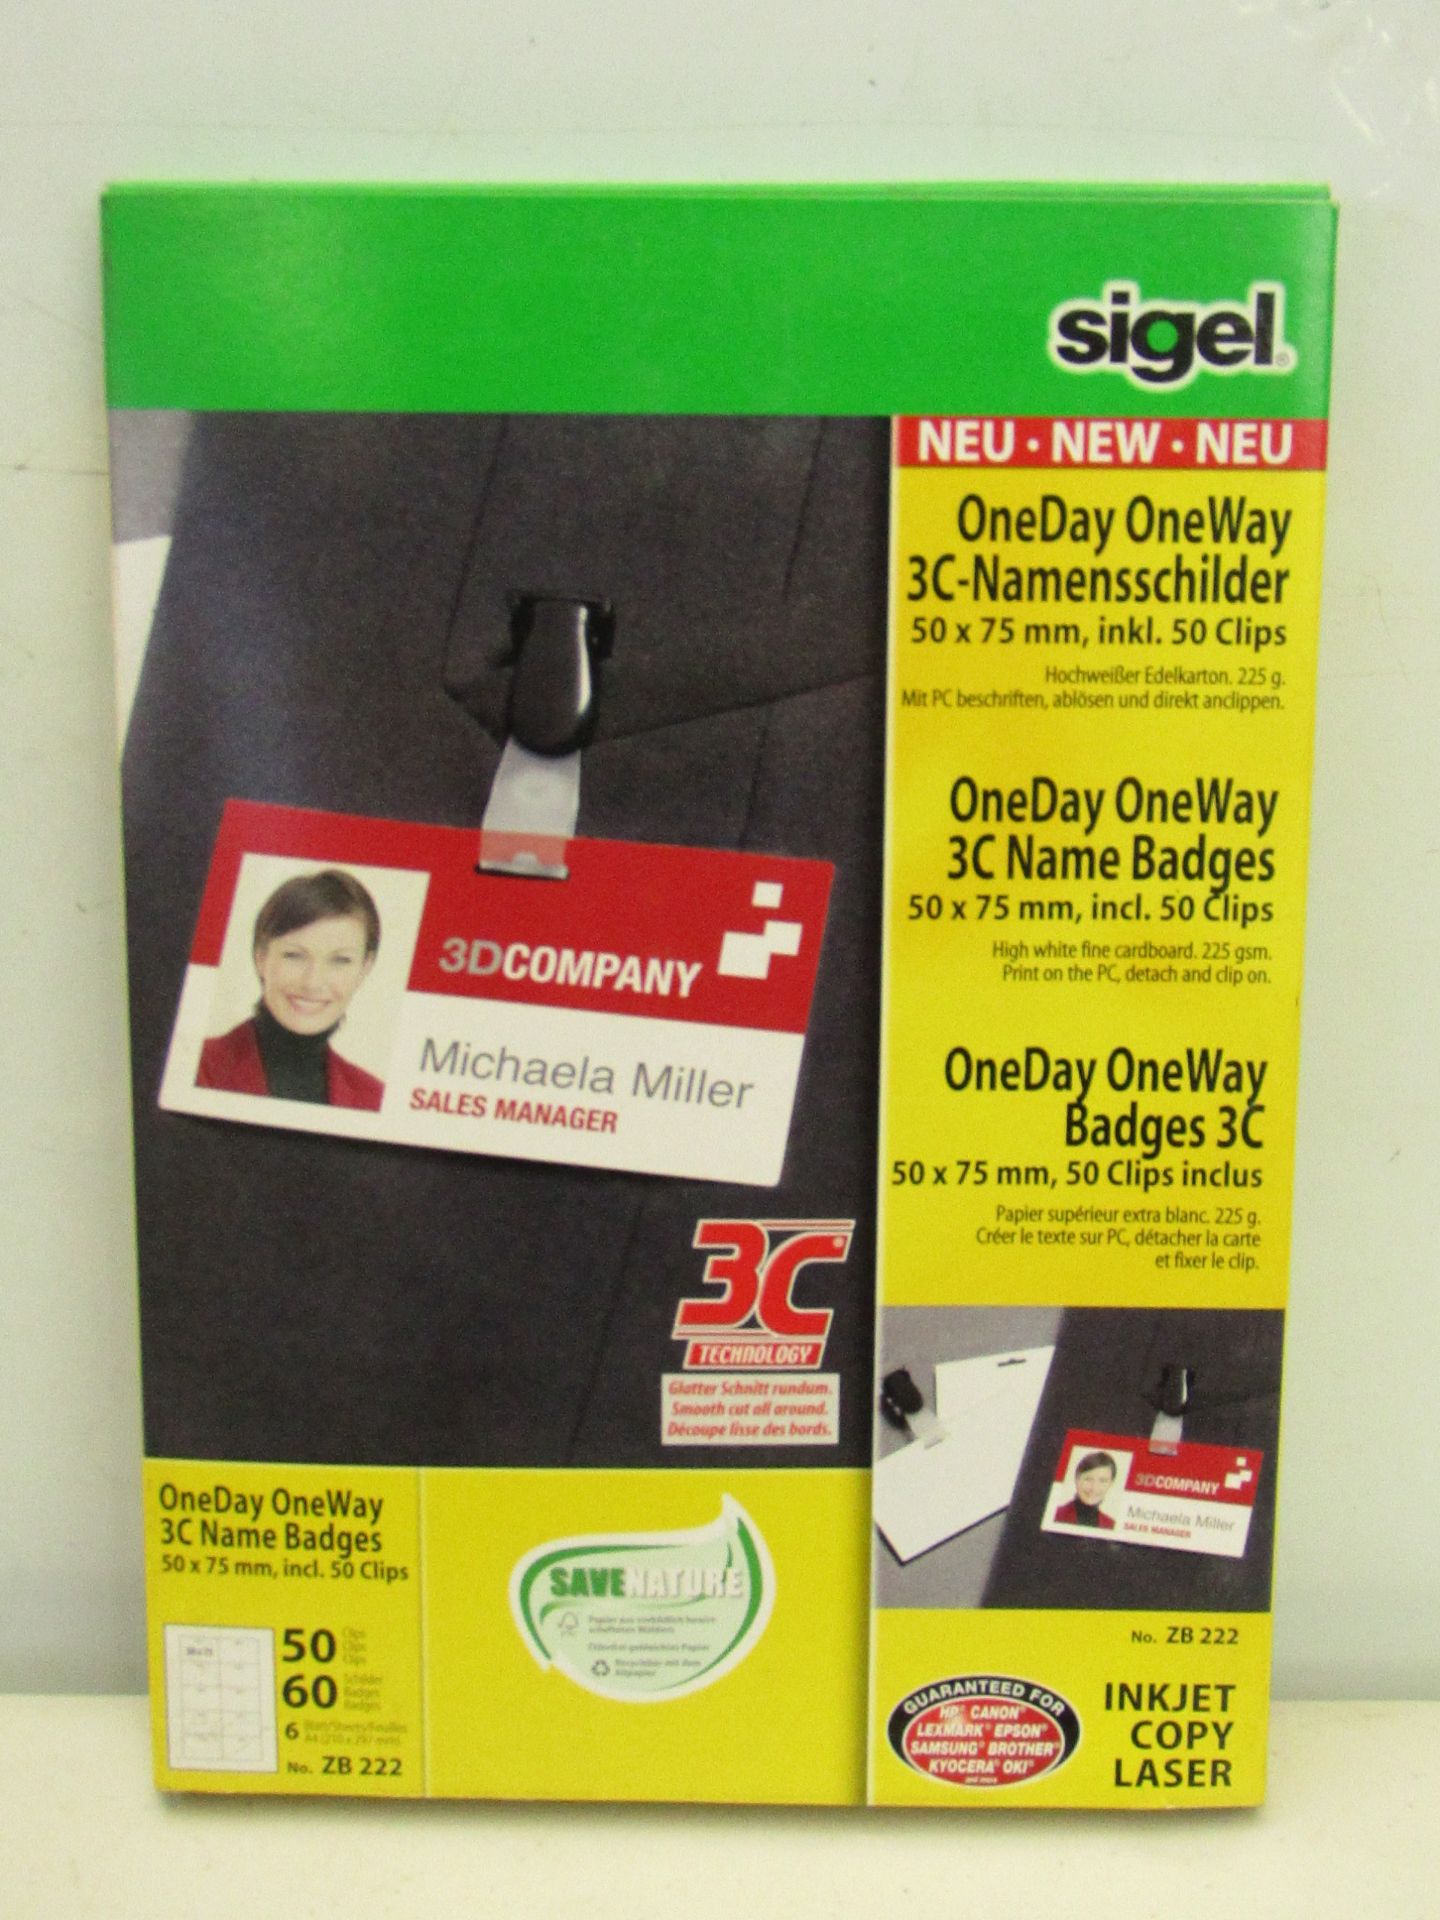 4x packs of Sigel A4 3C Oneday Oneway White Name Badges, each pack includes 50 clips and 60